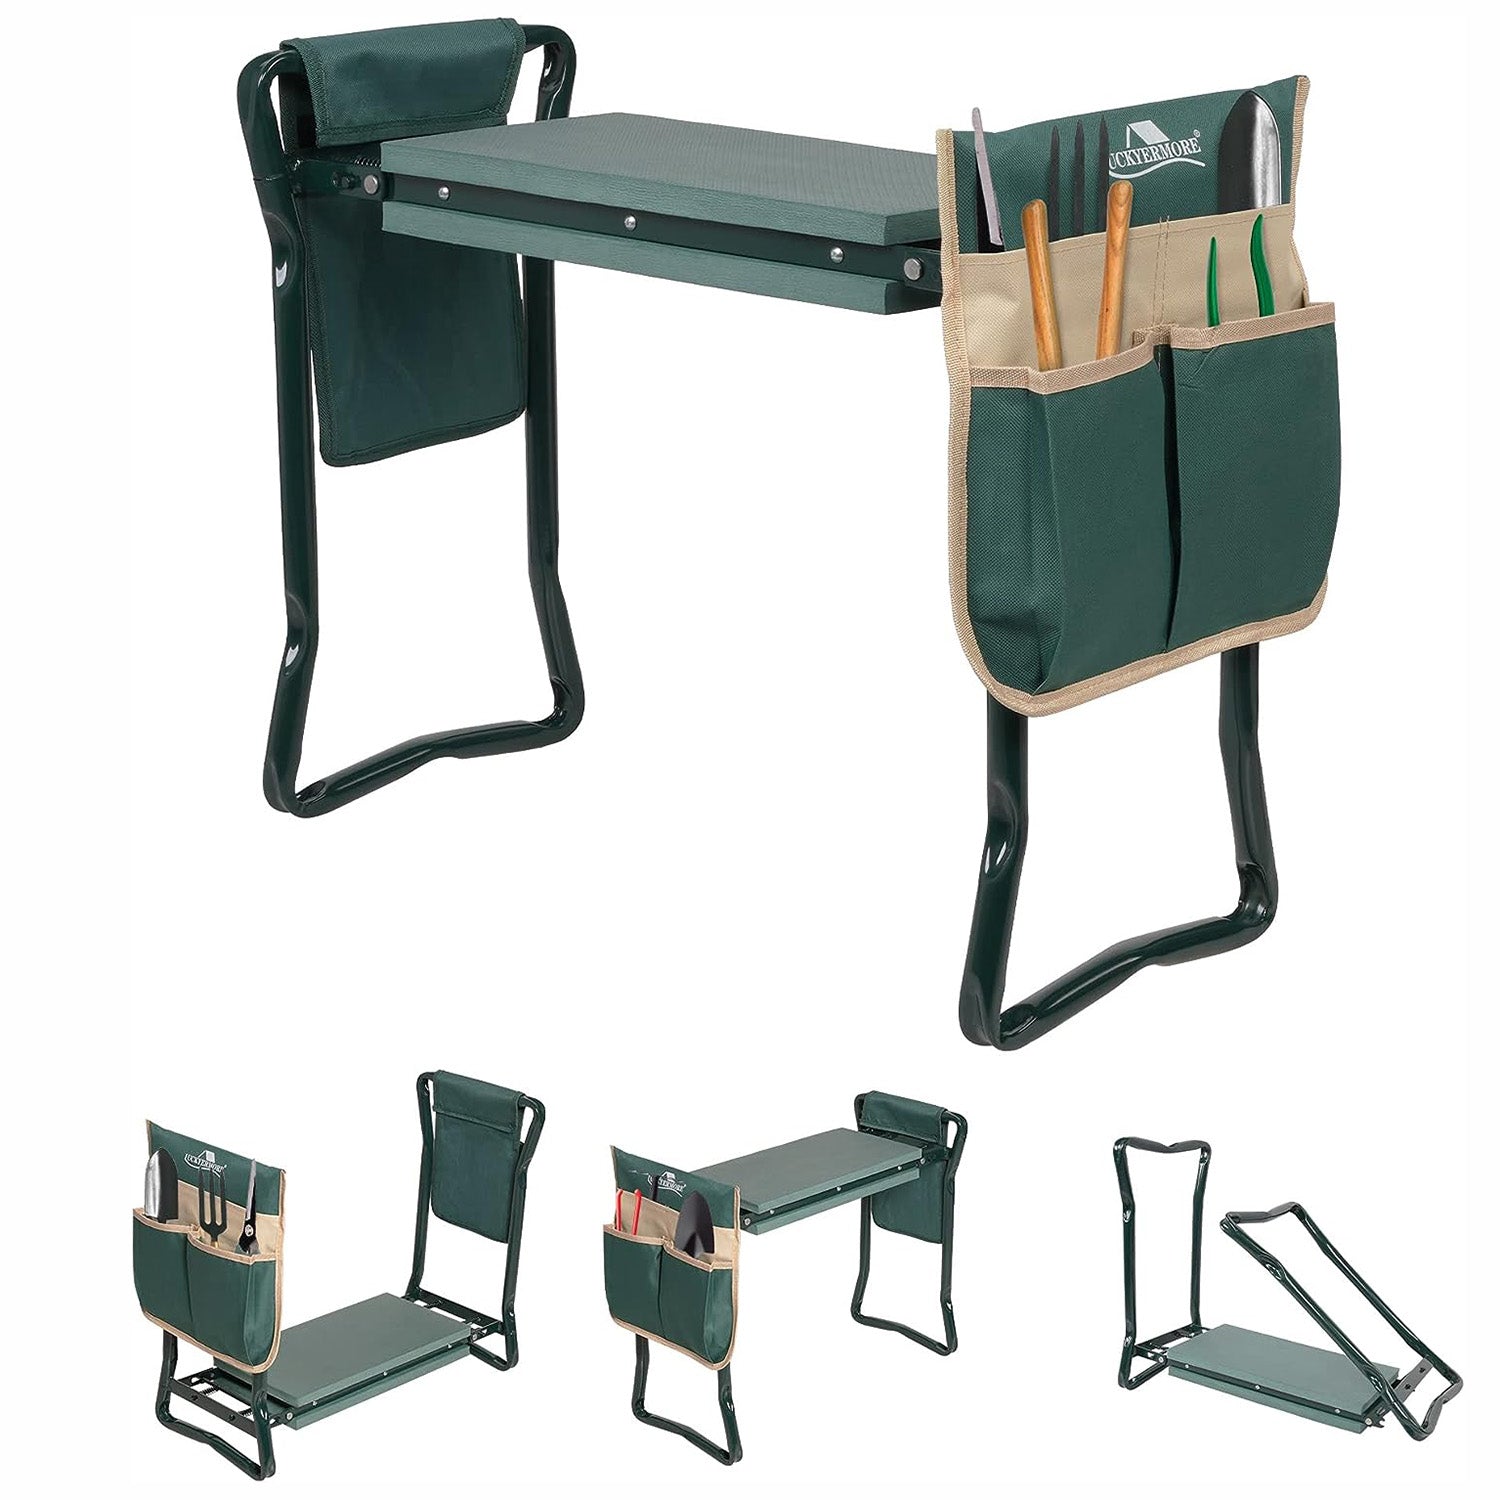 LUCKYERMORE Widen Garden Kneeler Folding Garden Stools Bench and Seat with 2 Tool Pouches